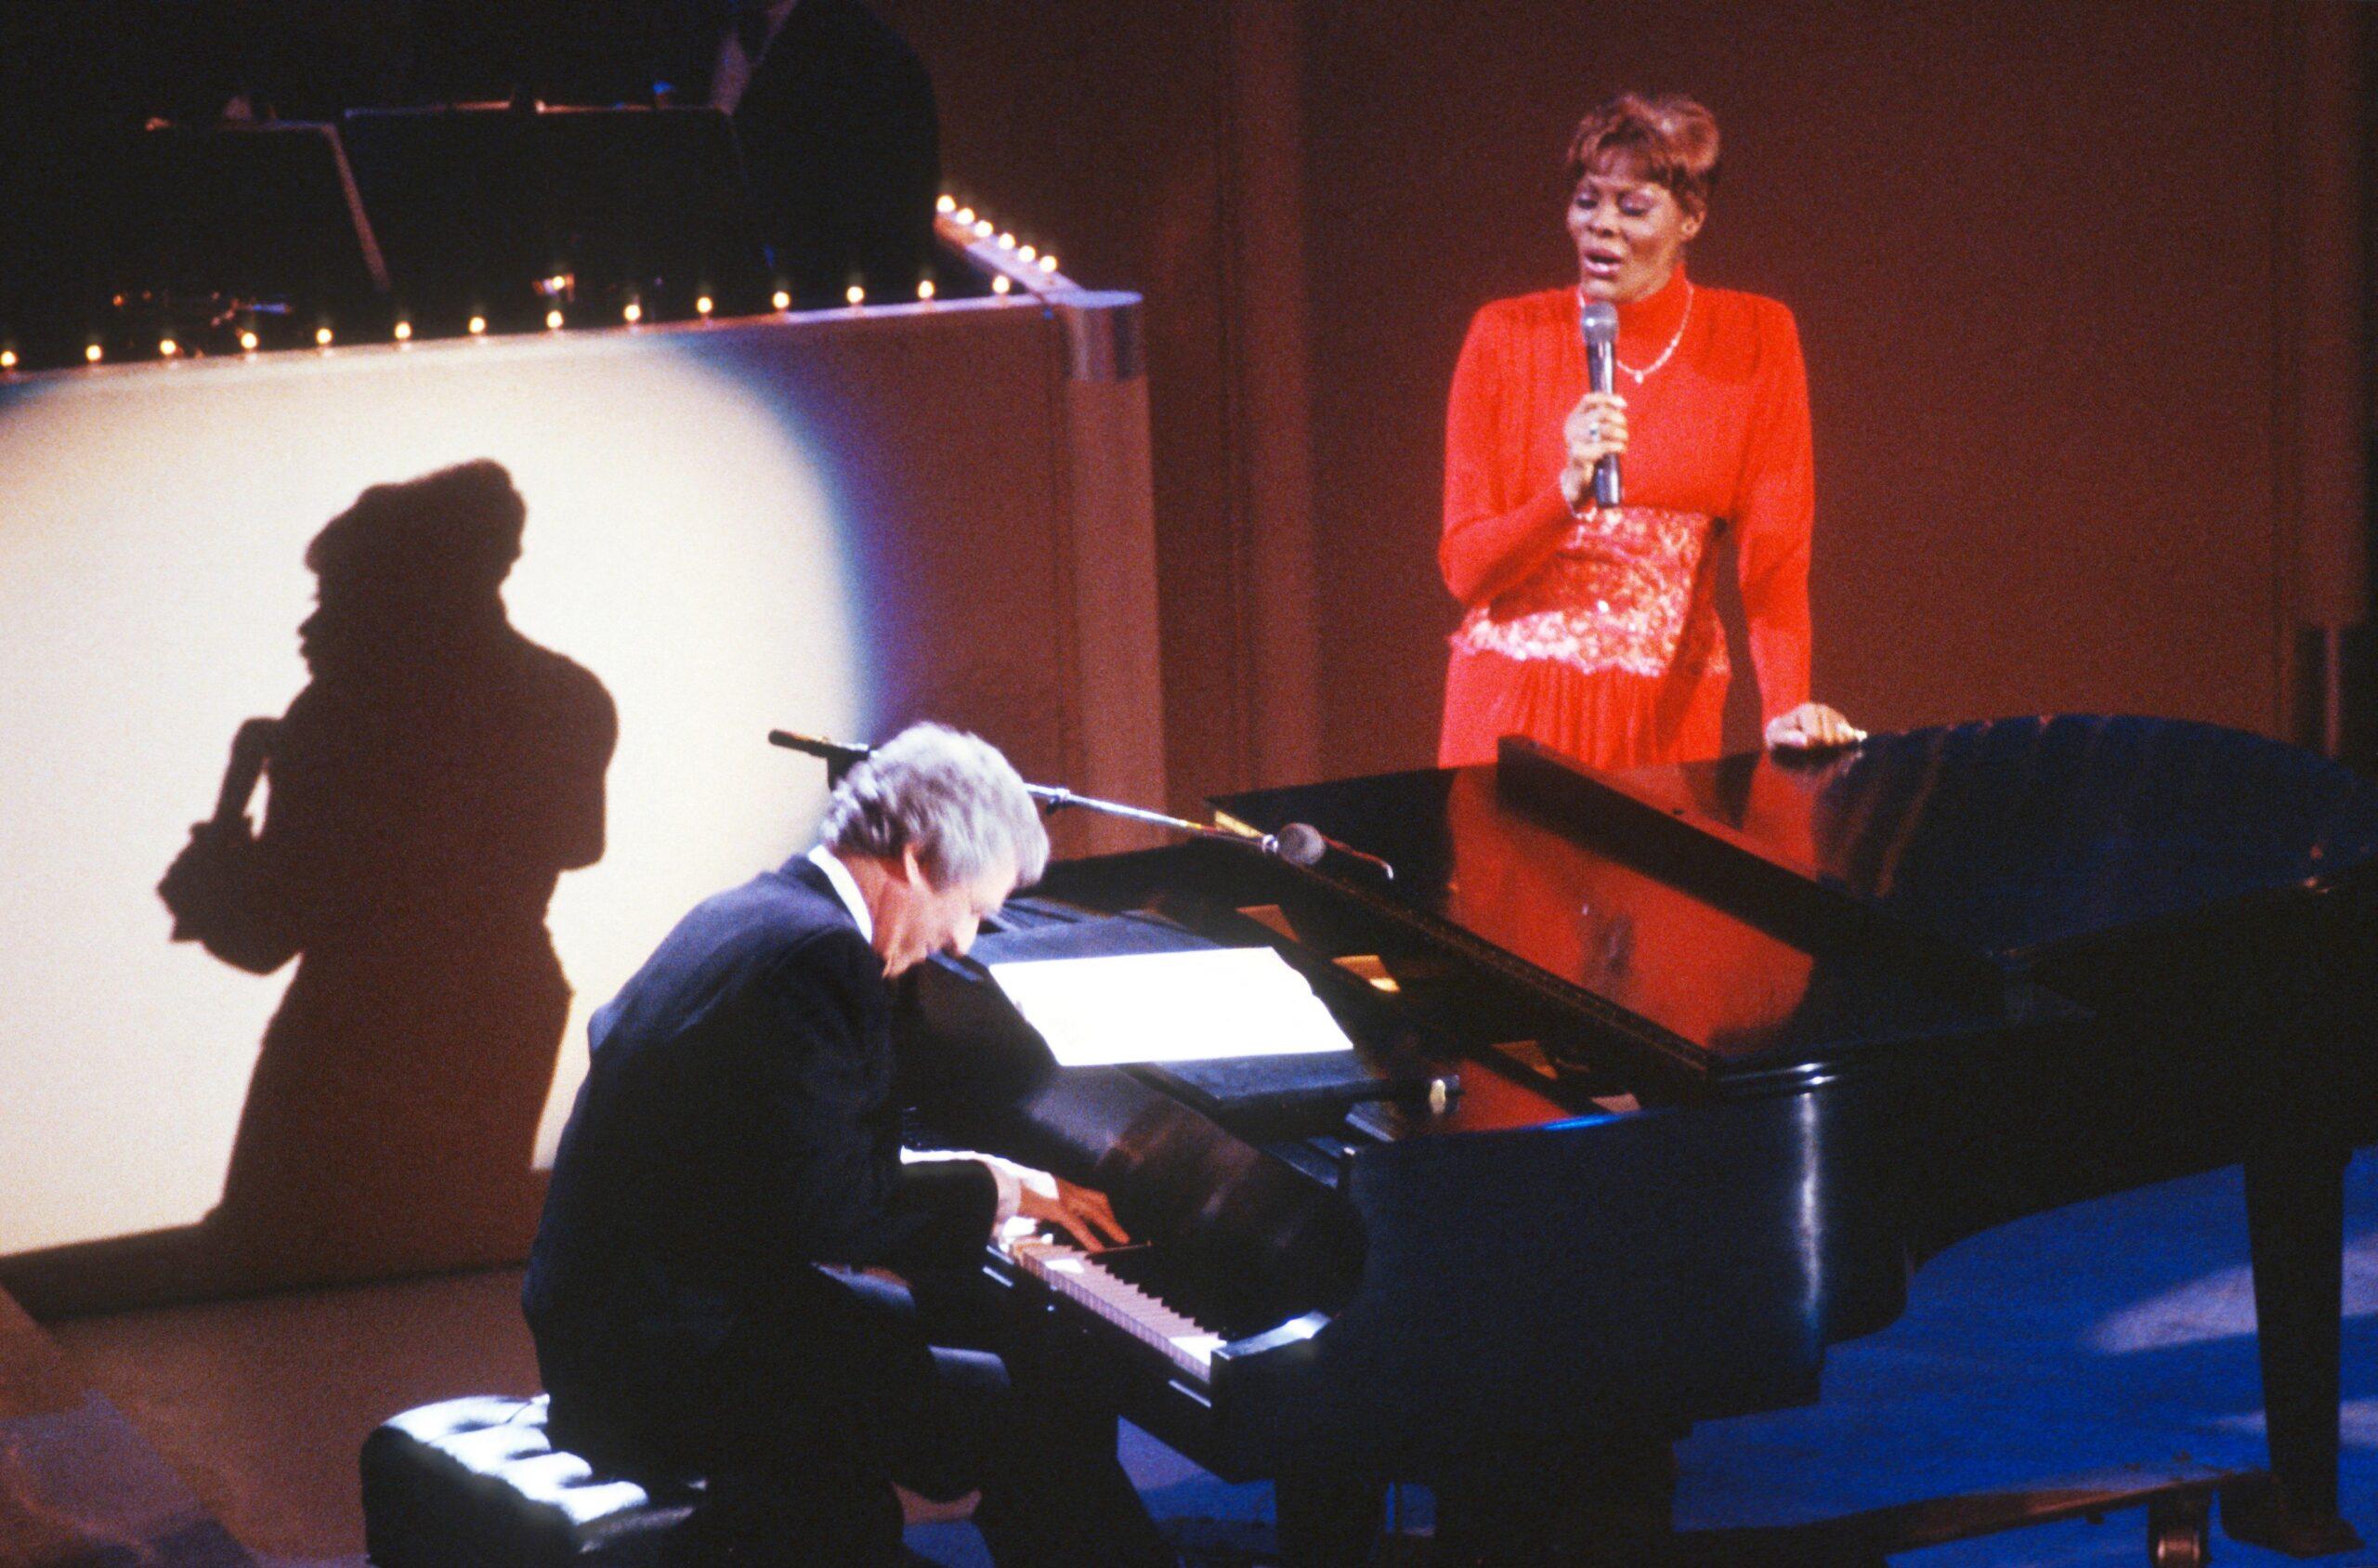 Burt Bacharach Only Had $200,000 In 'Personal Property' At Time Of His Death